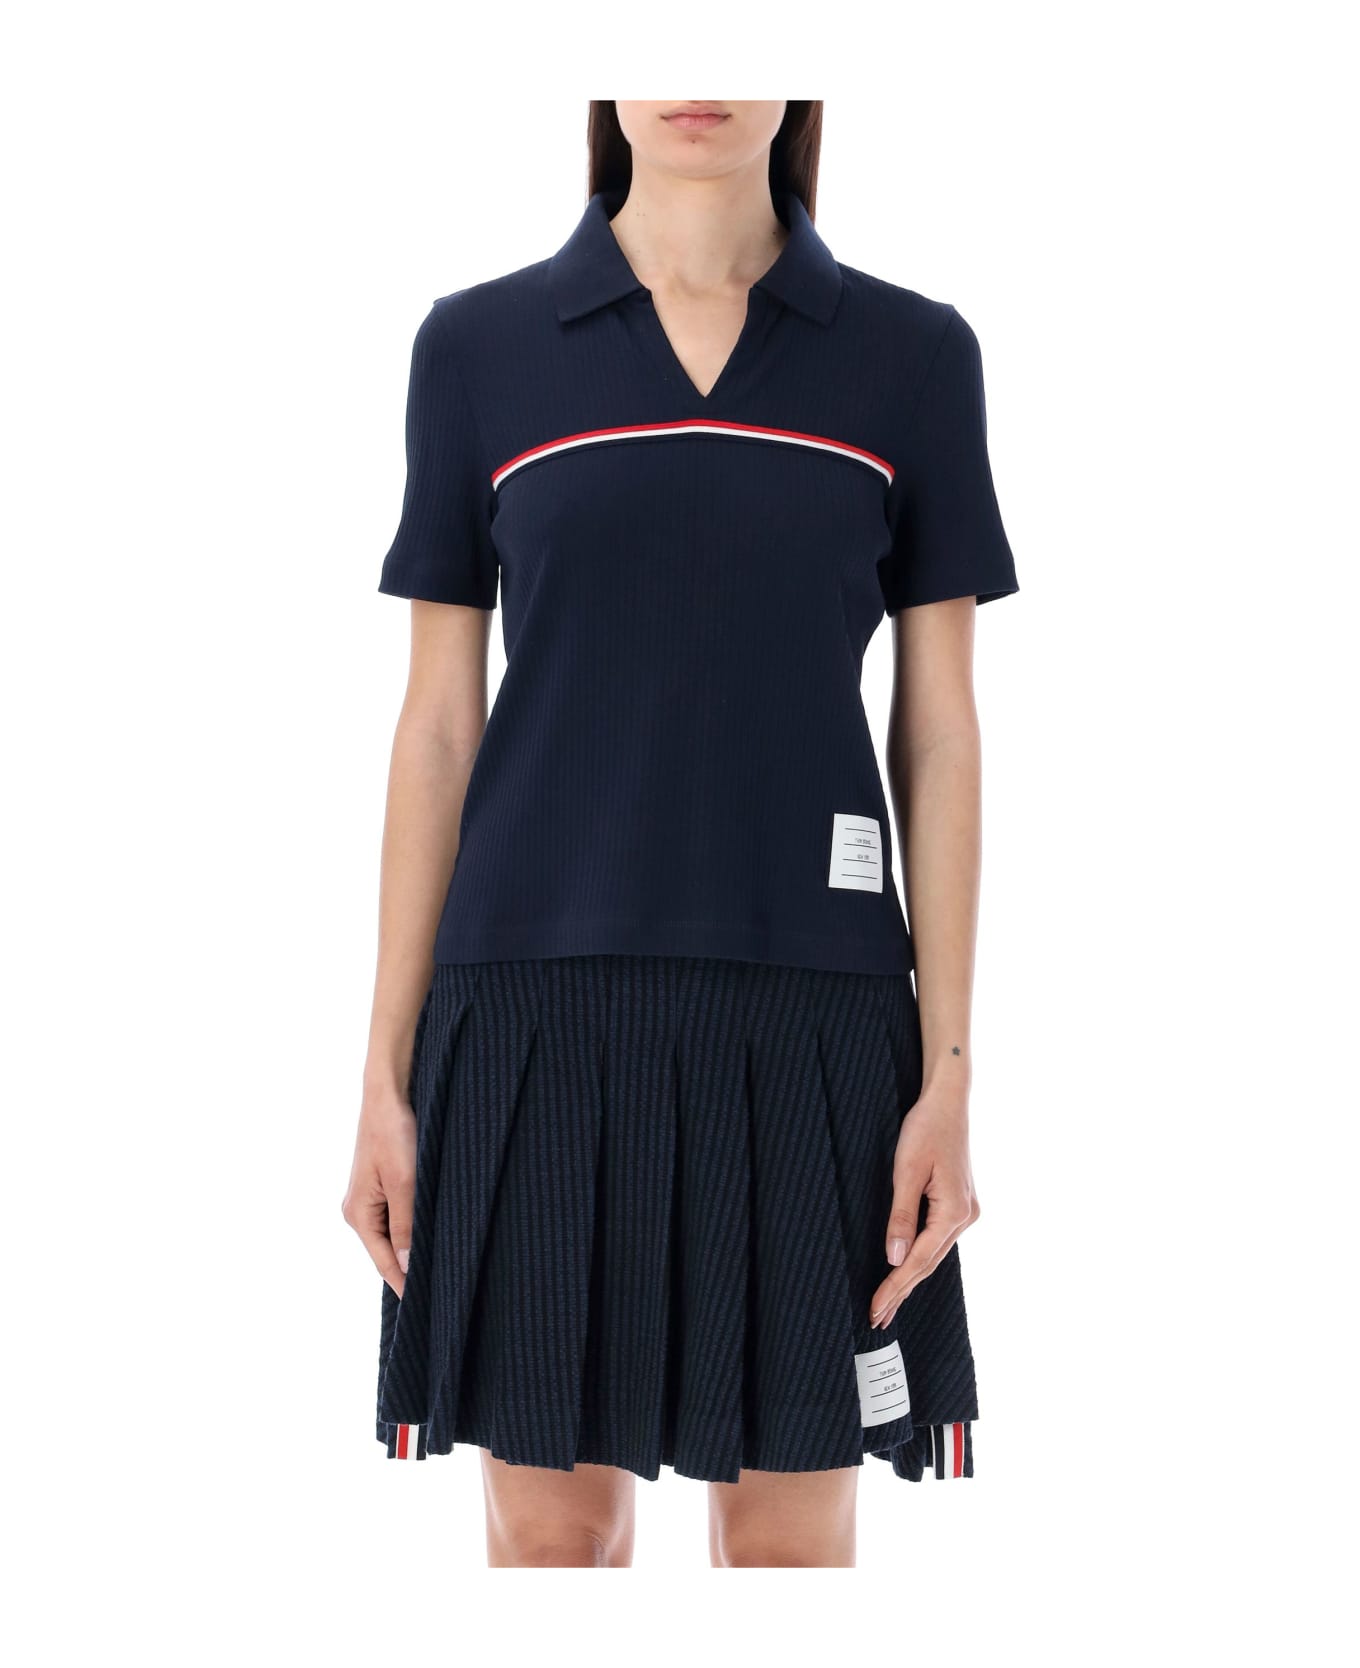 Thom Browne S/s Polo With Web Stripes - NAVY